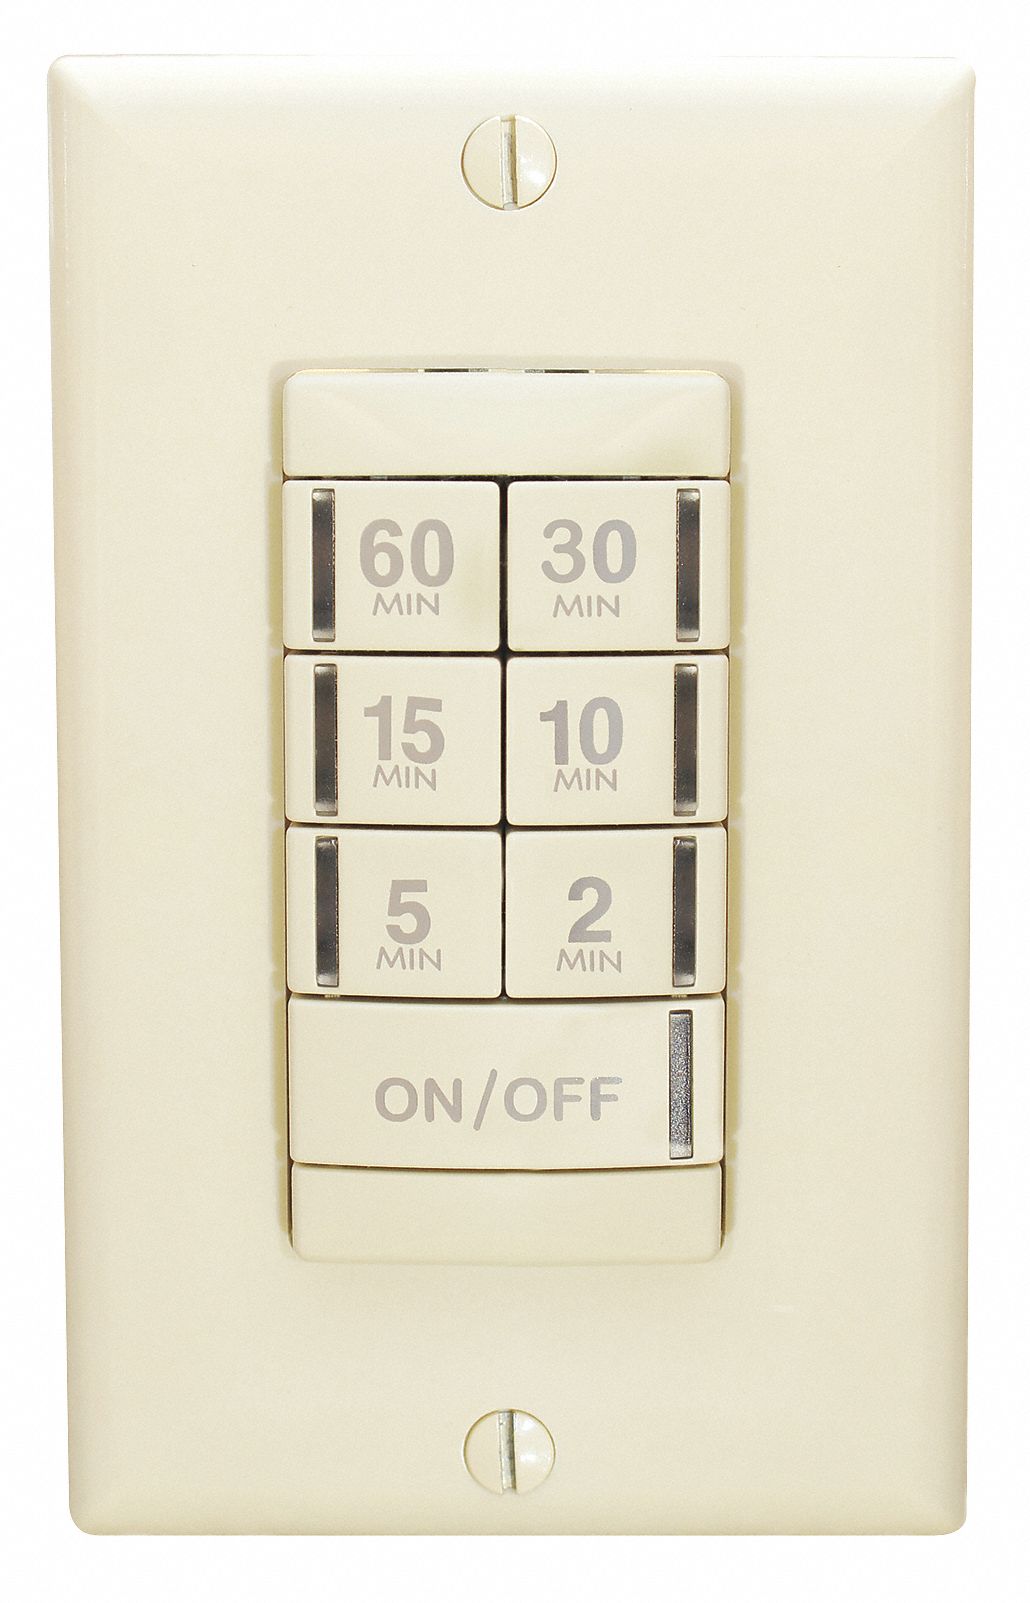 ACUITY SENSOR SWITCH 120/277VAC Wall Switch Timer, Ivory   Wall Switch Timers   16A715|PTS 60 IV